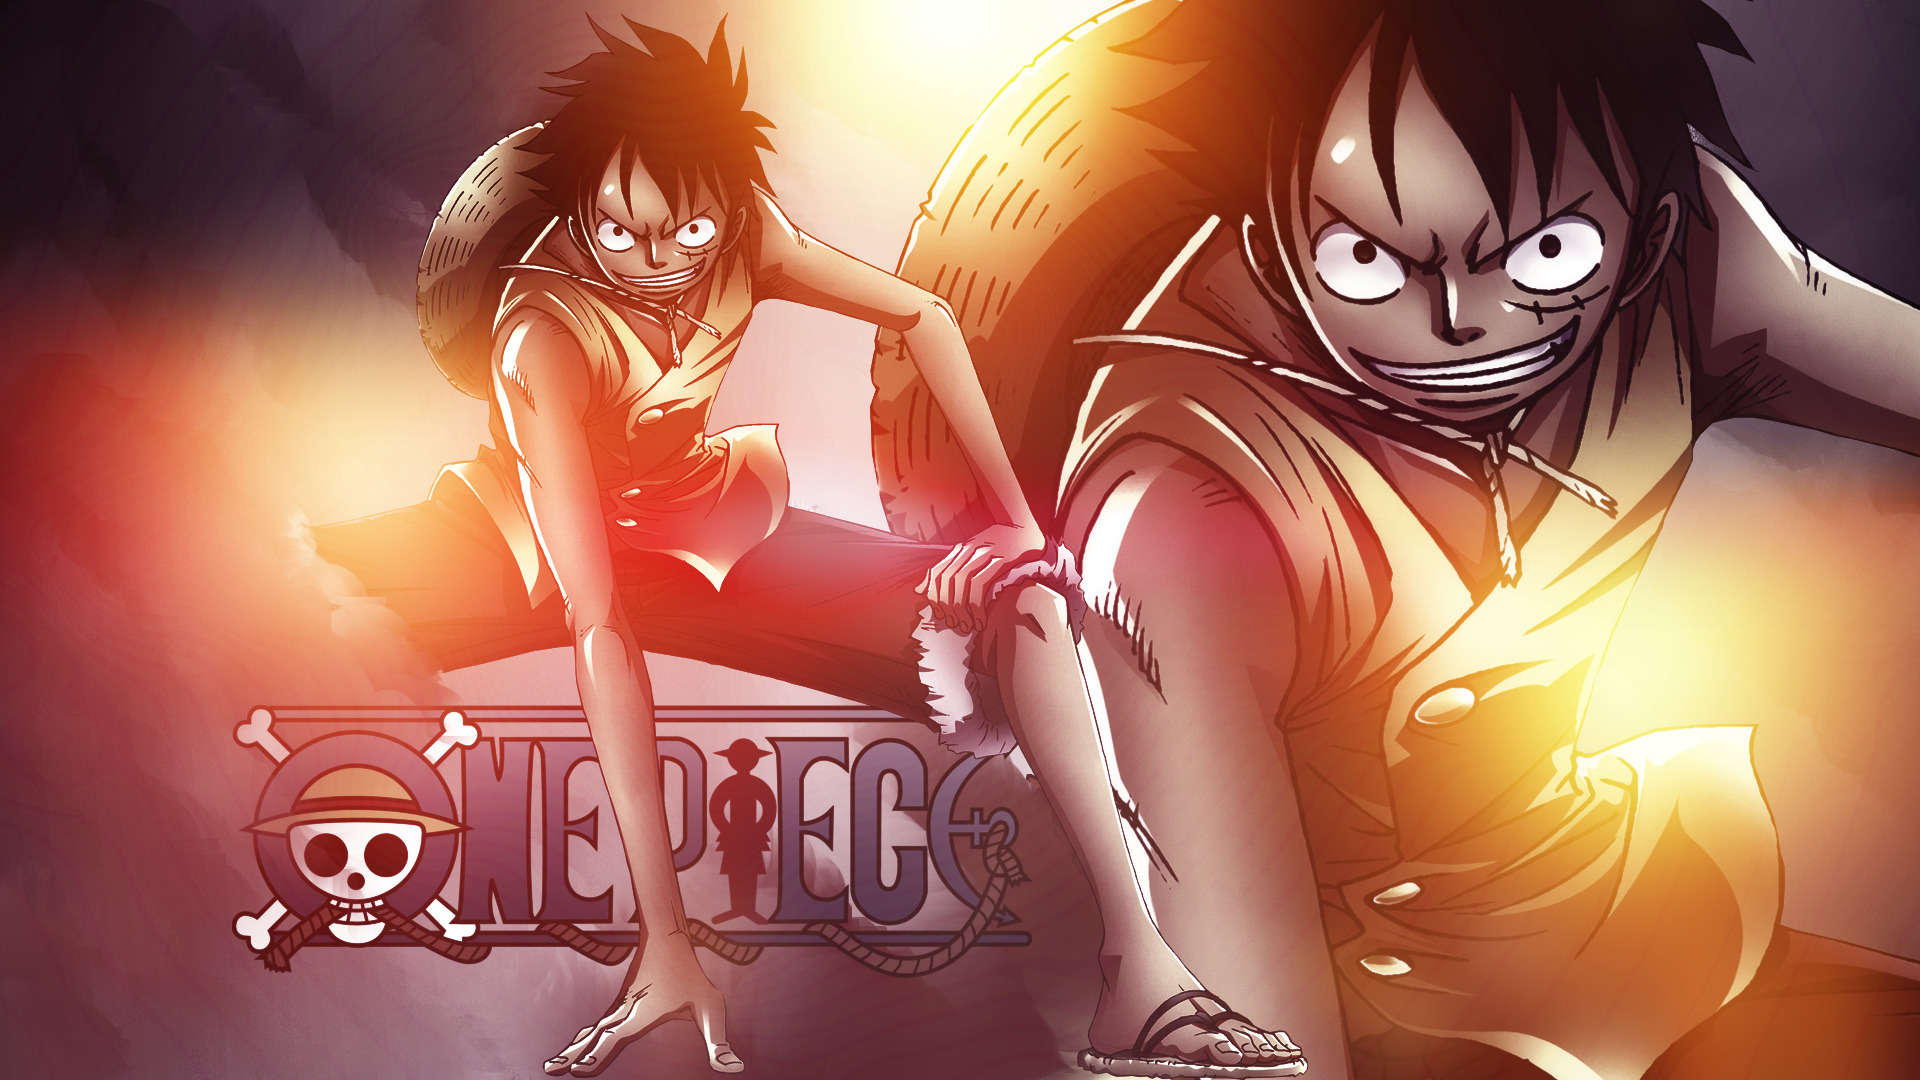 One Piece Luffy Wallpapers Downloads A20 - Free cool beautiful 3d manga anime desktop mobile phone Backgrounds wallpapers downloads